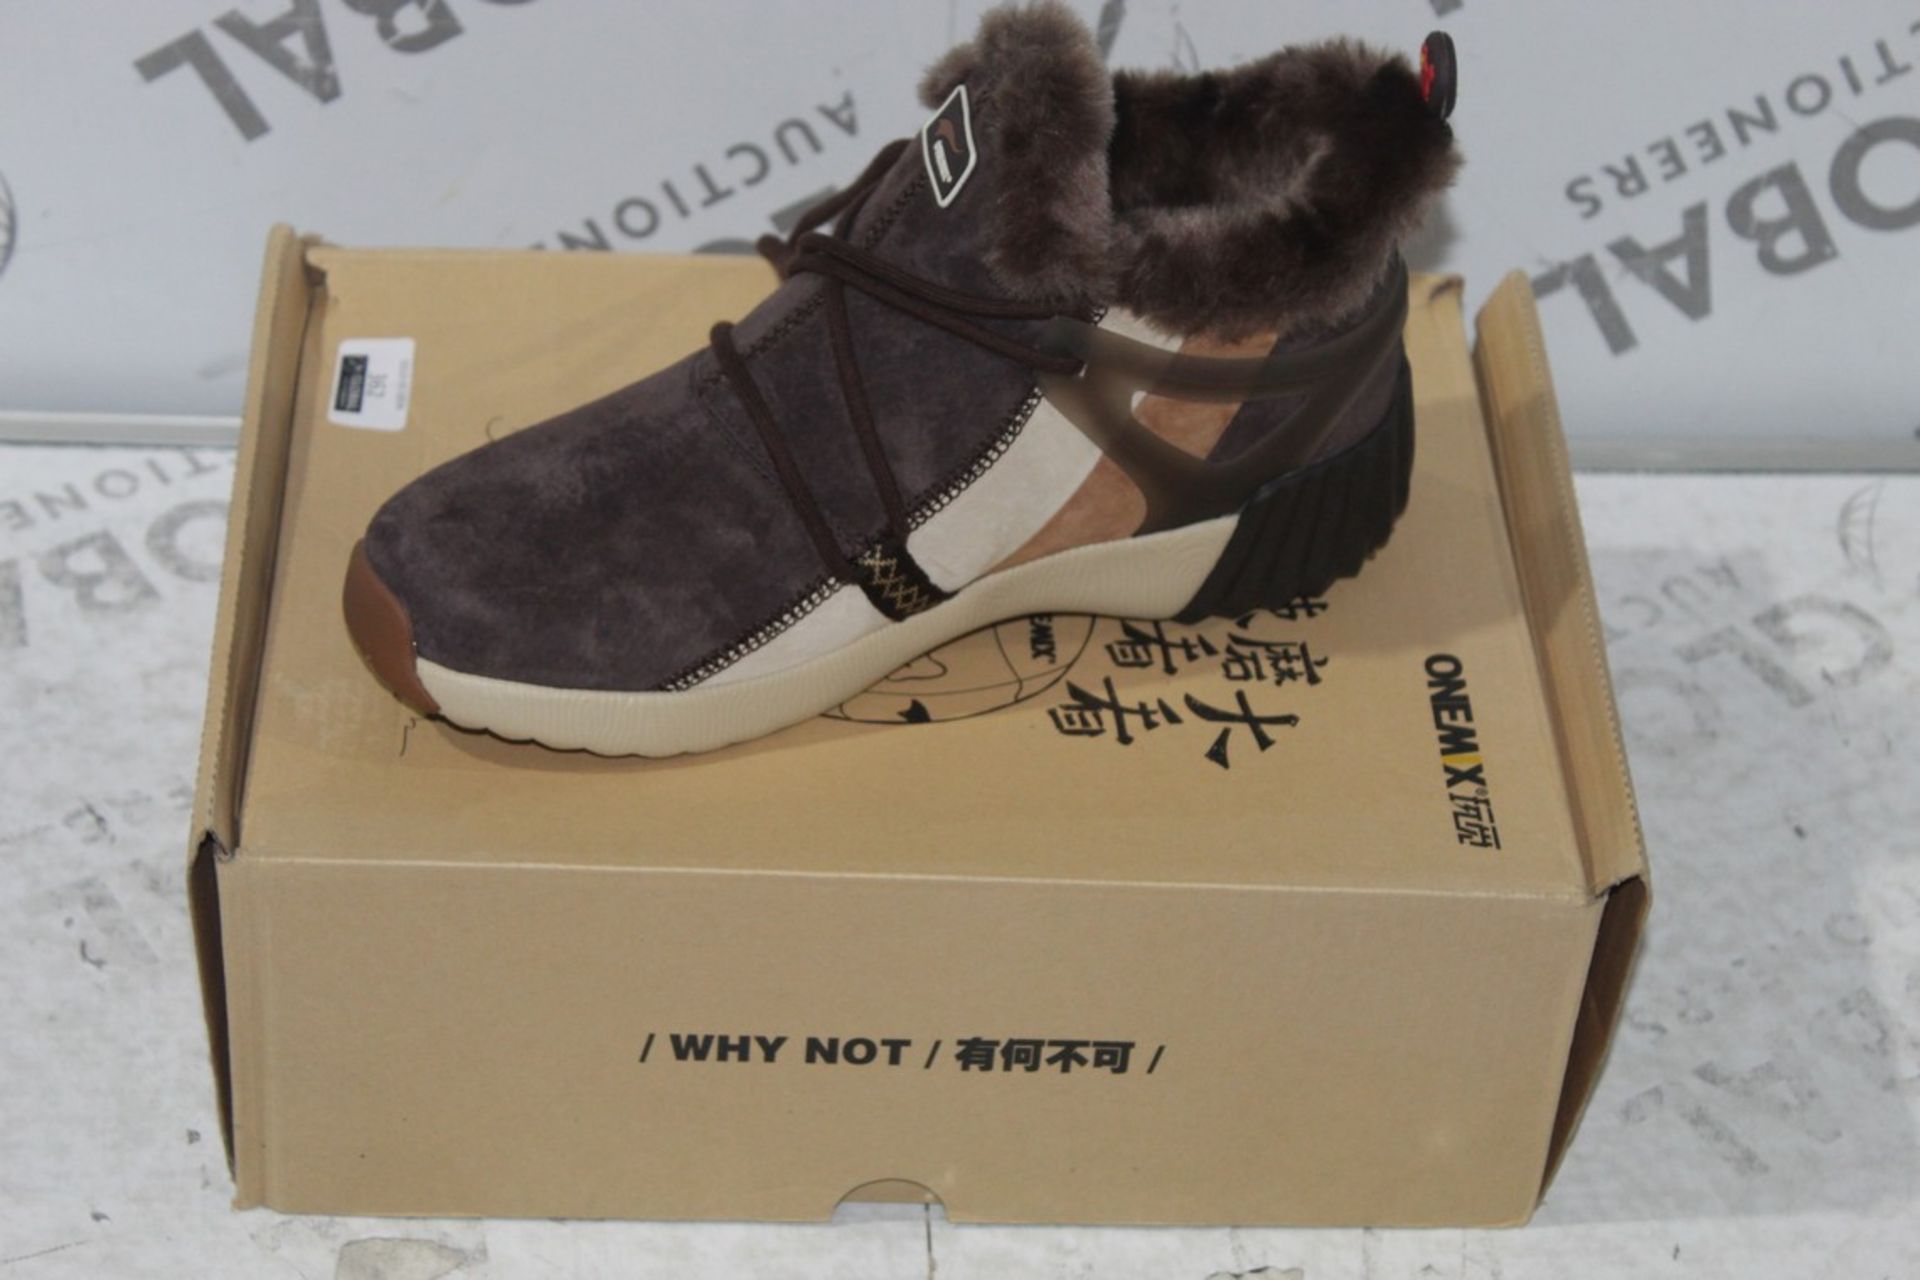 Boxed Brand New Pair Of Brown Suede One Mix Fur Lined Trainers Size RRP £45 (Public Viewing and